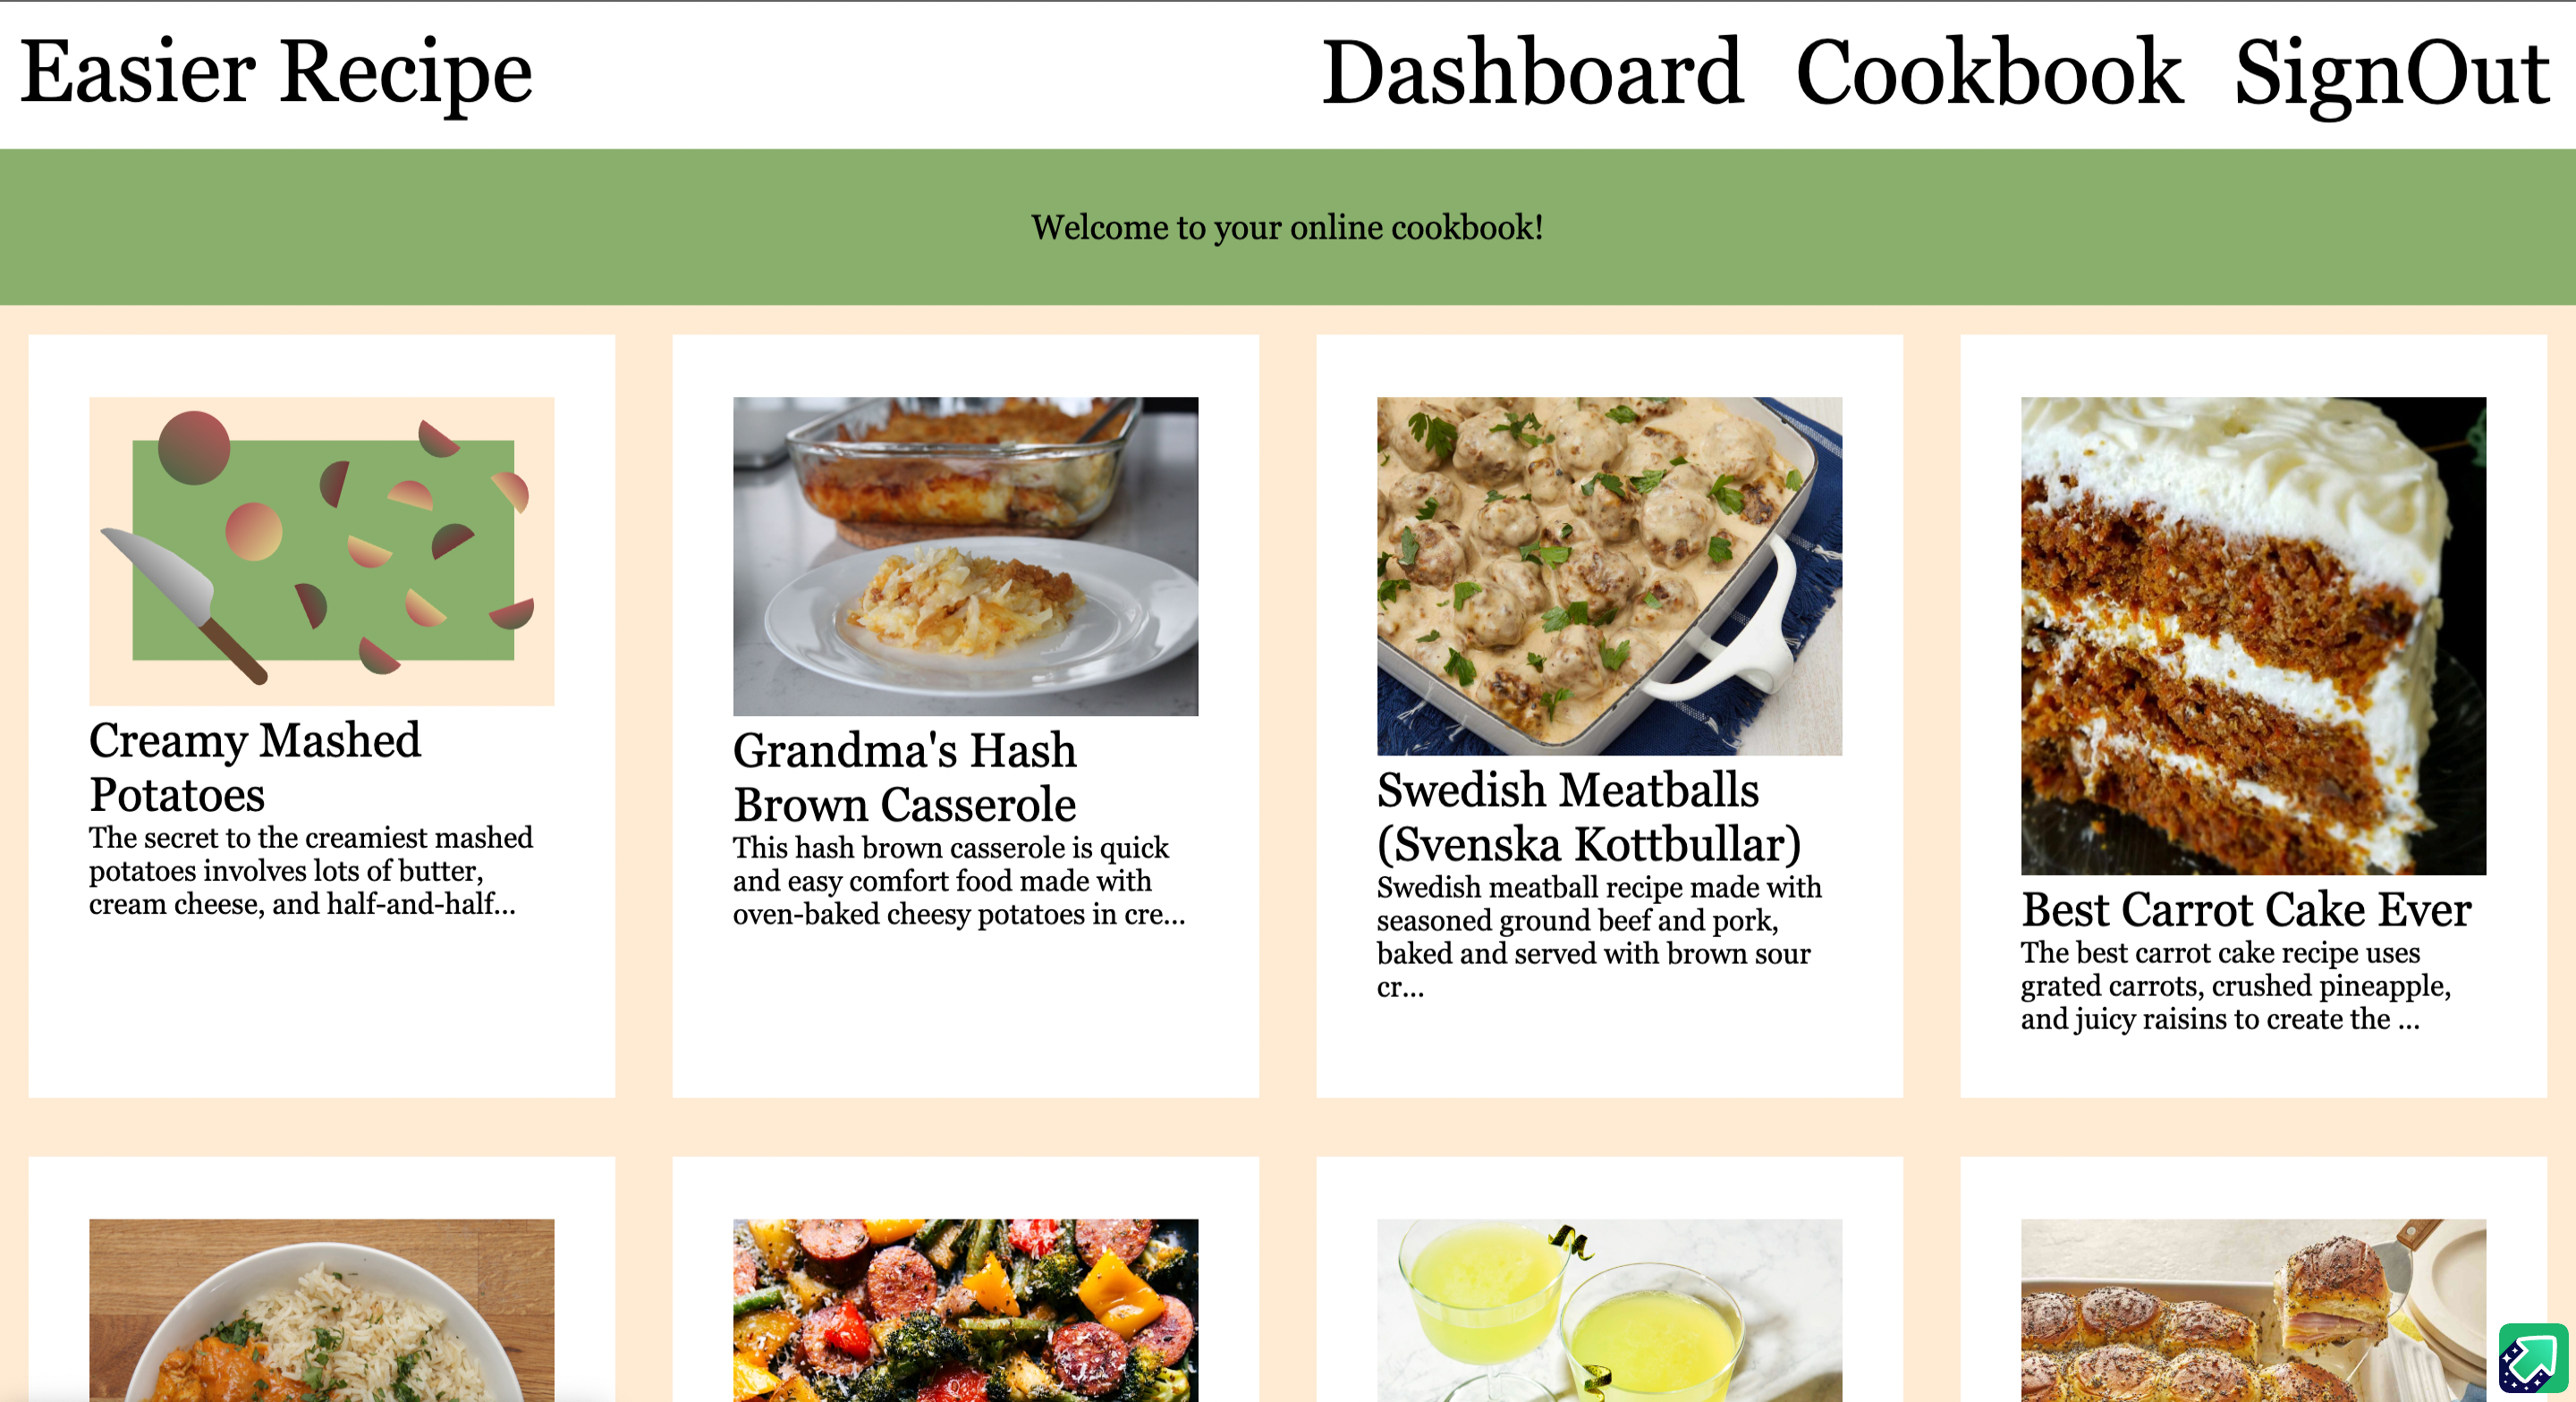 The main recipe page of Easier Recipe